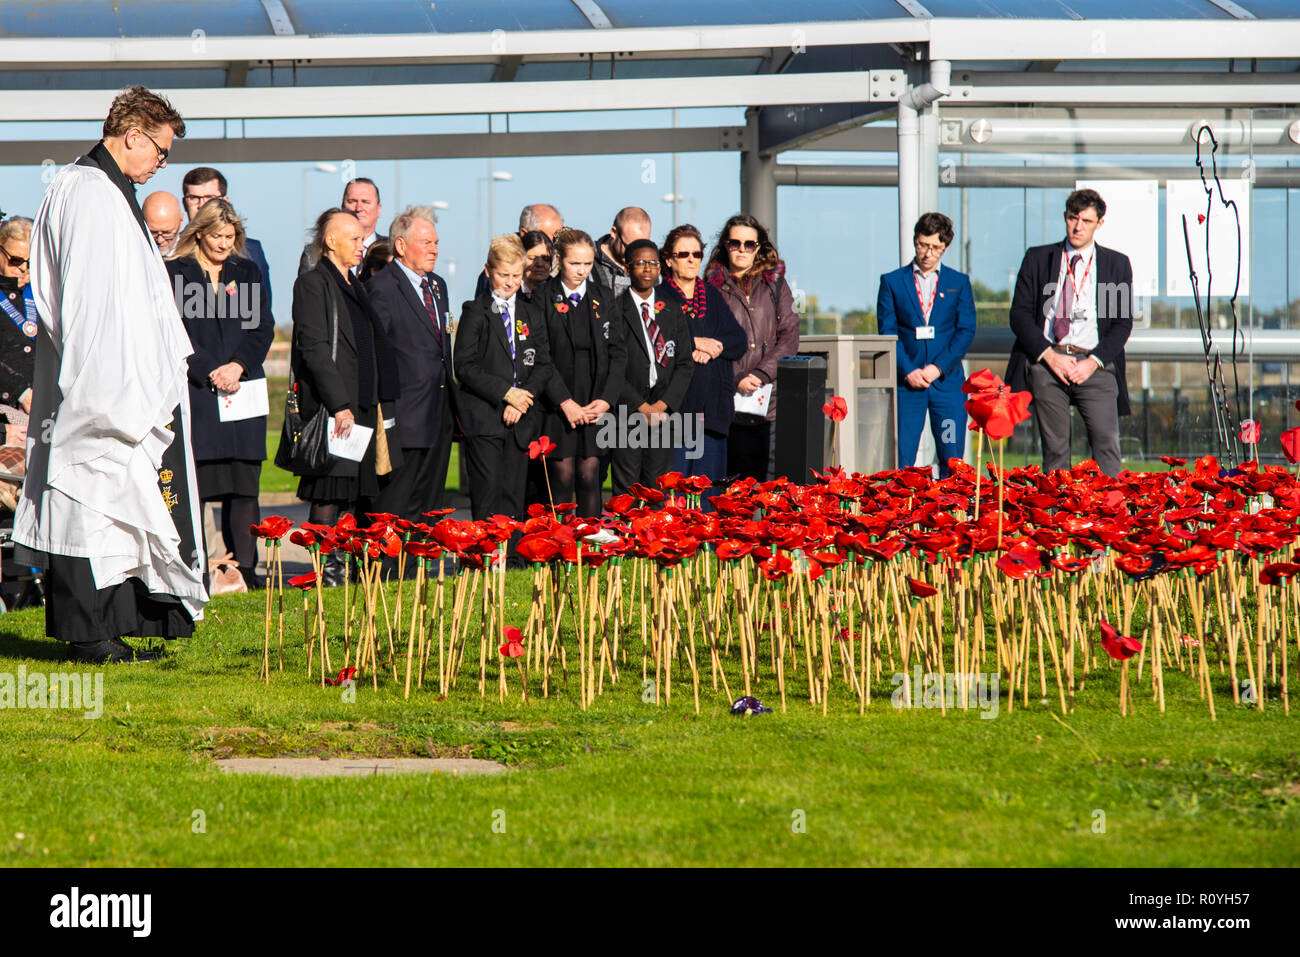 London Southend Airport, Essex, UK. To mark the centenary of the end of World War One a commemorative garden has been opened outside the terminal at London Southend Airport consisting of 2000 red ceramic poppies made by hundreds of children from 25 Southend schools. The airport served as RAF Rochford during both World Wars Stock Photo